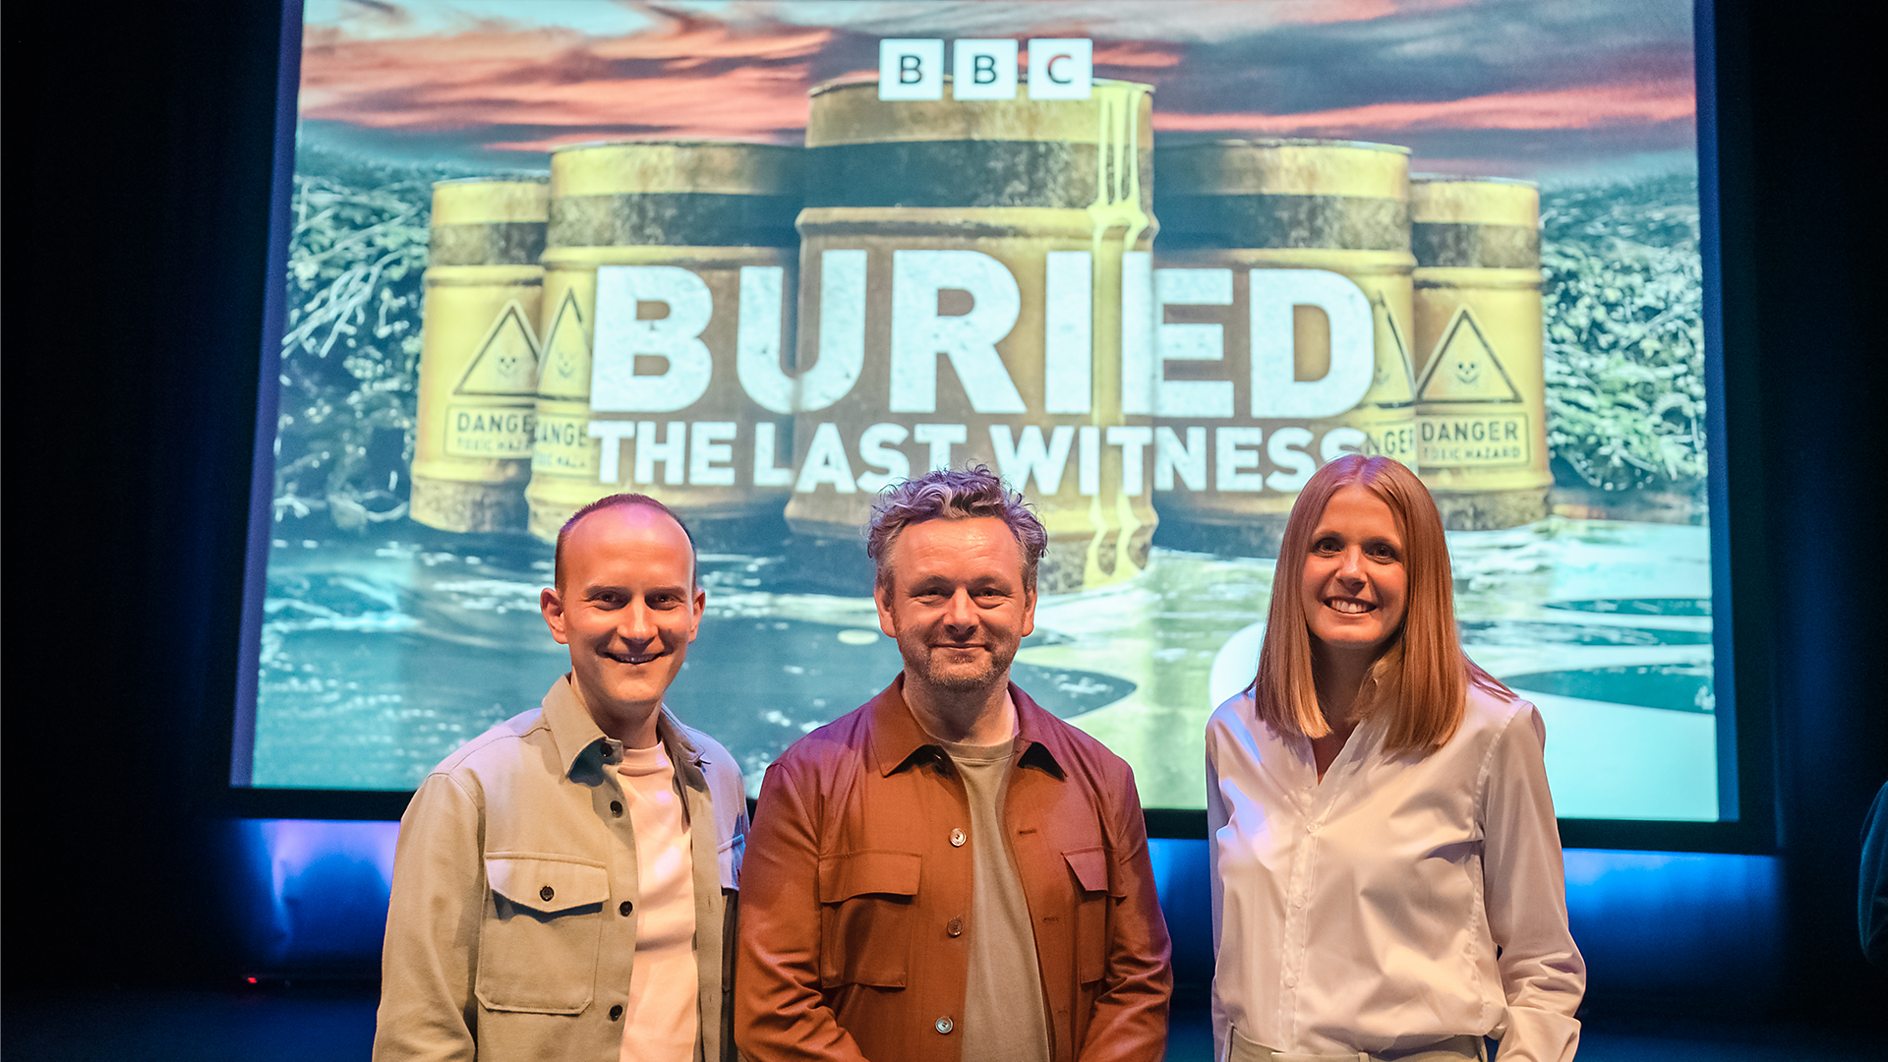 Interview with Michael Sheen on BBC Radio 4's "Buried: The Last Witness"